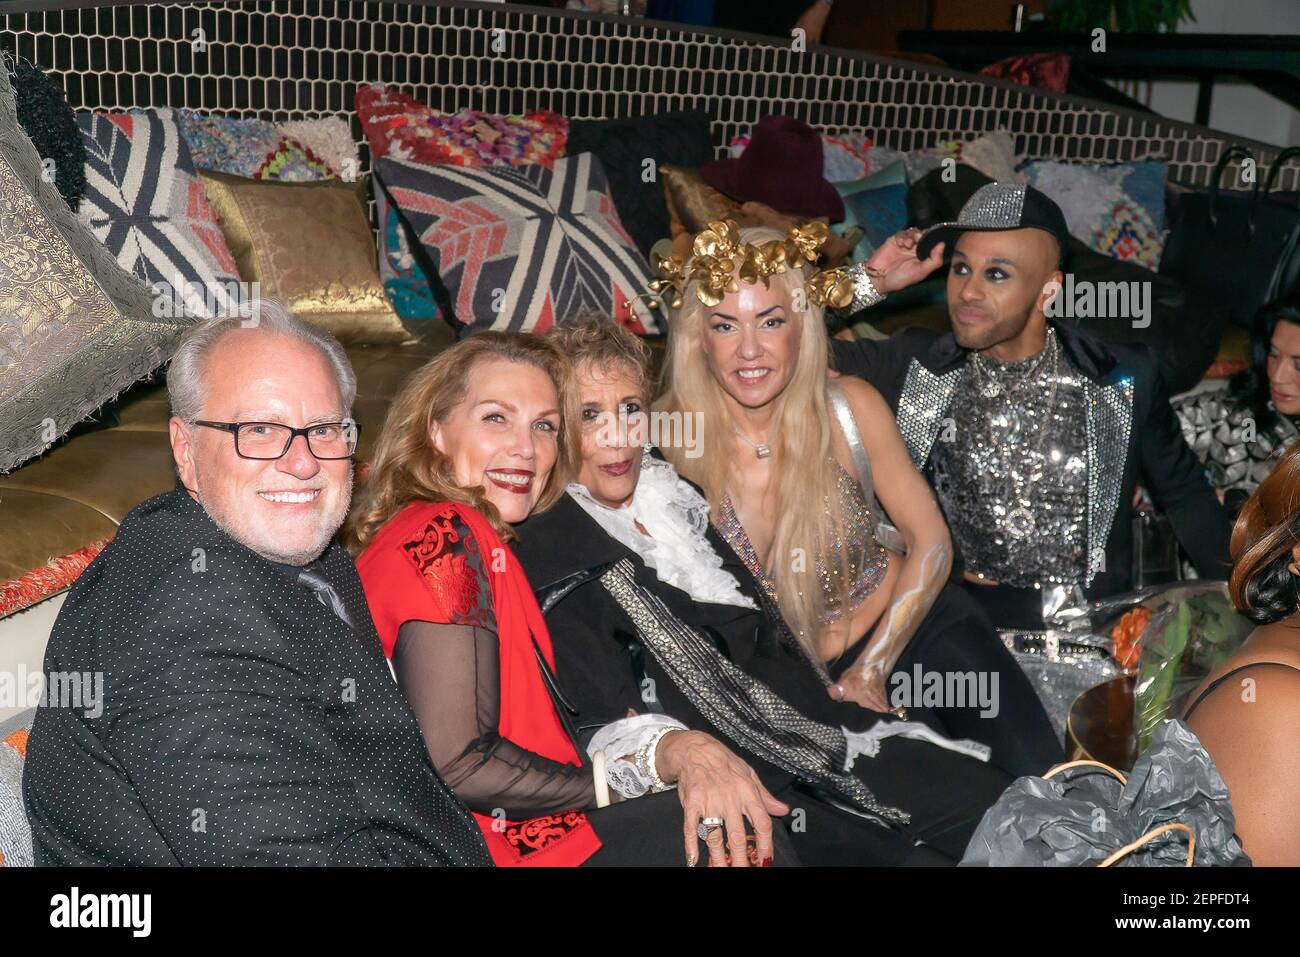 Michael Keegan, Denise Pereau, Lucia Kaiser, Luciana Pampalone and Aaron Paul a celebrate Lucia Kaiser's birthday at Celon at the Bryant Park Hotel in New York, NY on December 13, 2019. (Photo by David Warren /Sipa? USA) Stock Photo